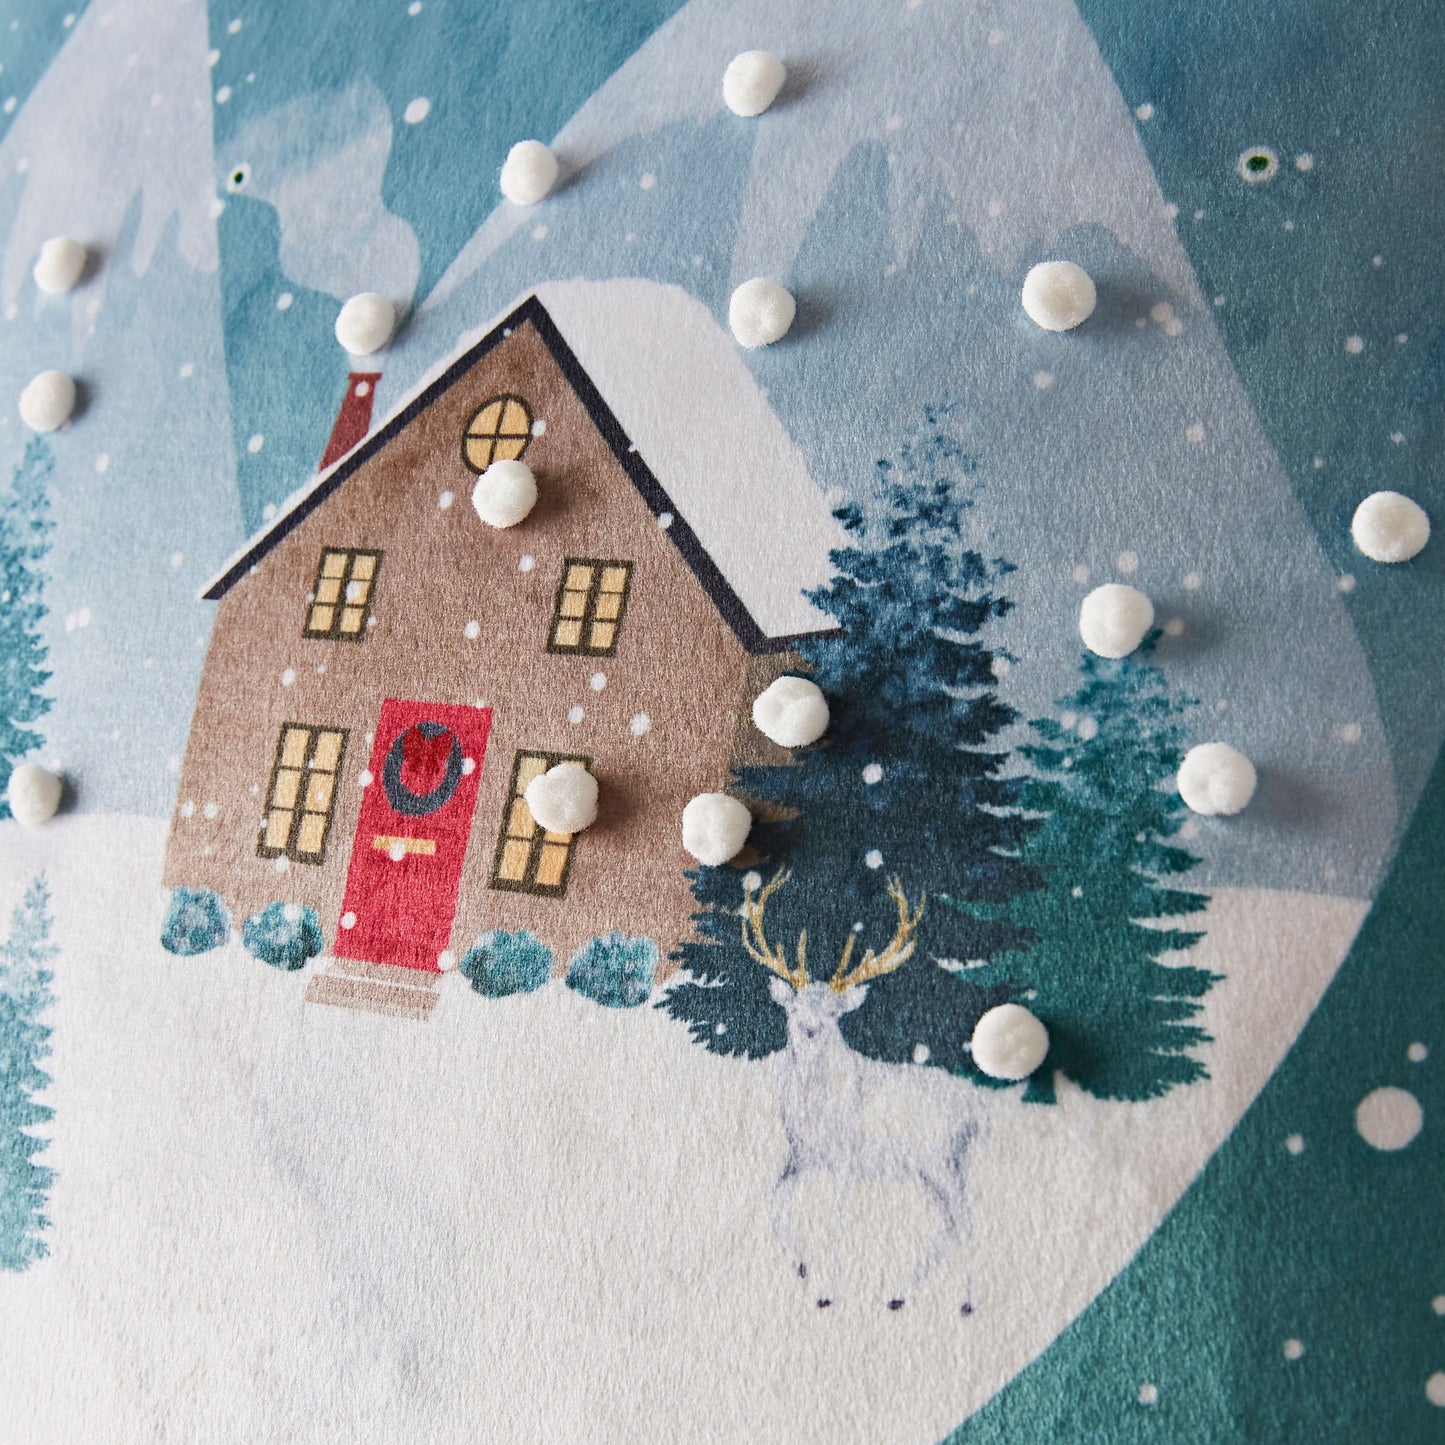 SNOW PLACE LIKE HOME CUSHION COVER 45X45CM